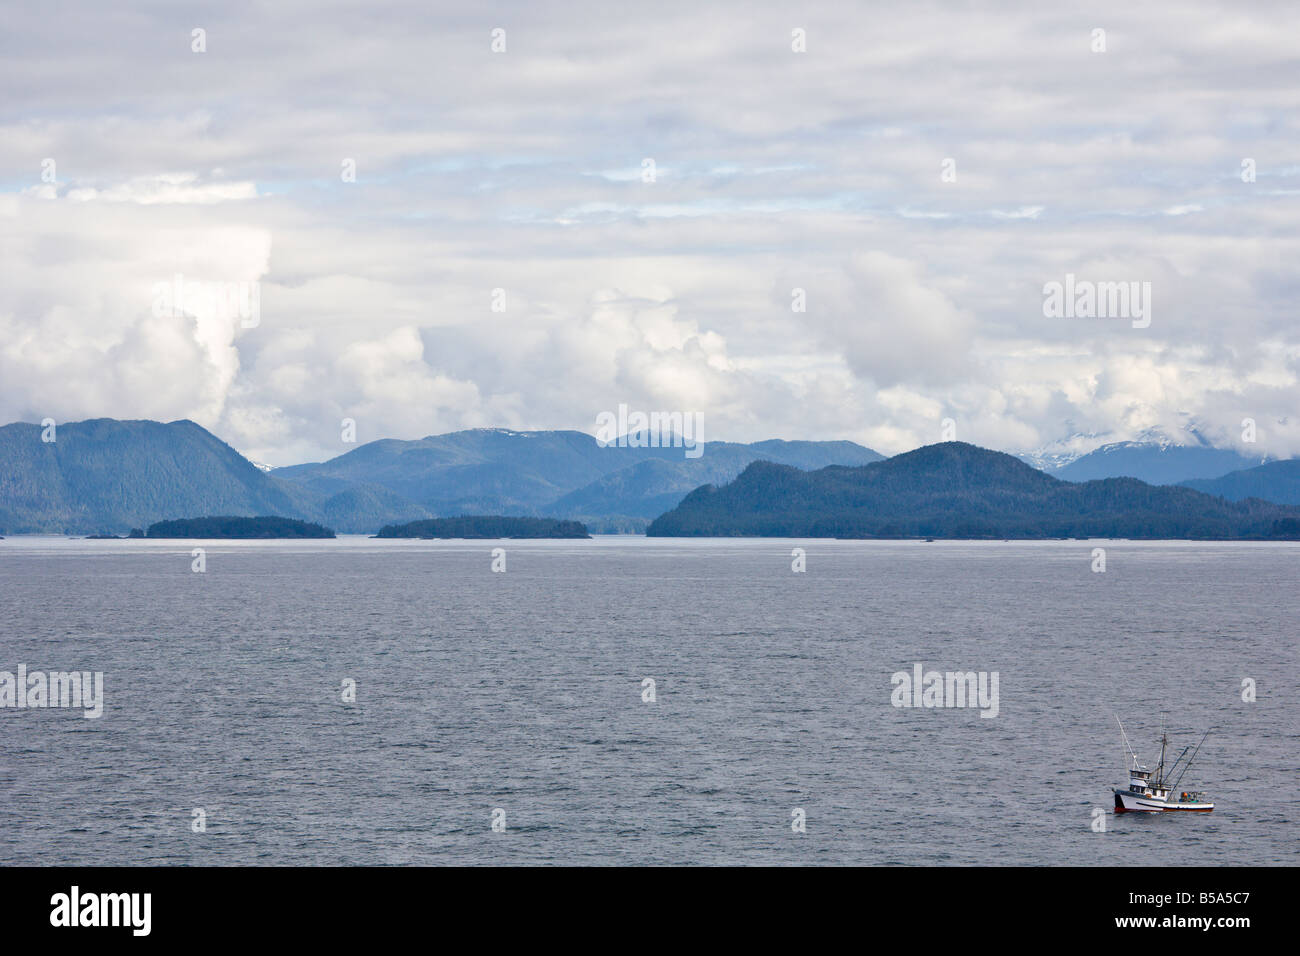 Commercial fishing boat trawling the waters of the Inside Passage between Seattle, WA and Alaska Stock Photo